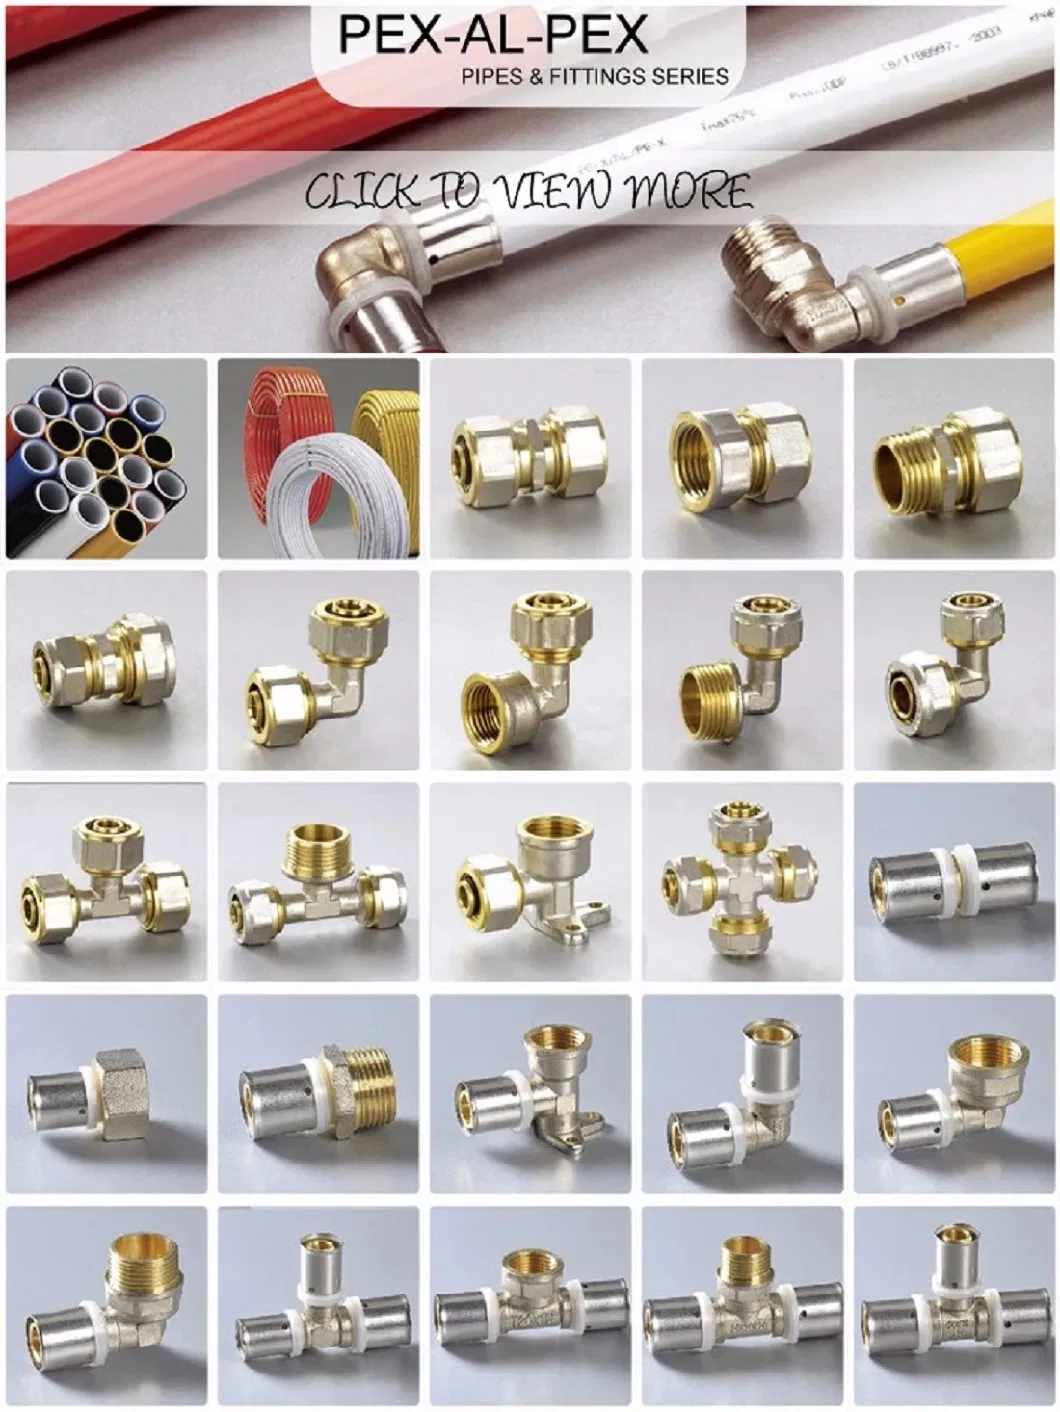 90 Degree Brass Elbow Pushfit Compression Brass Fittings for Pex-Al-Pex Multilayer/Composite Pipes